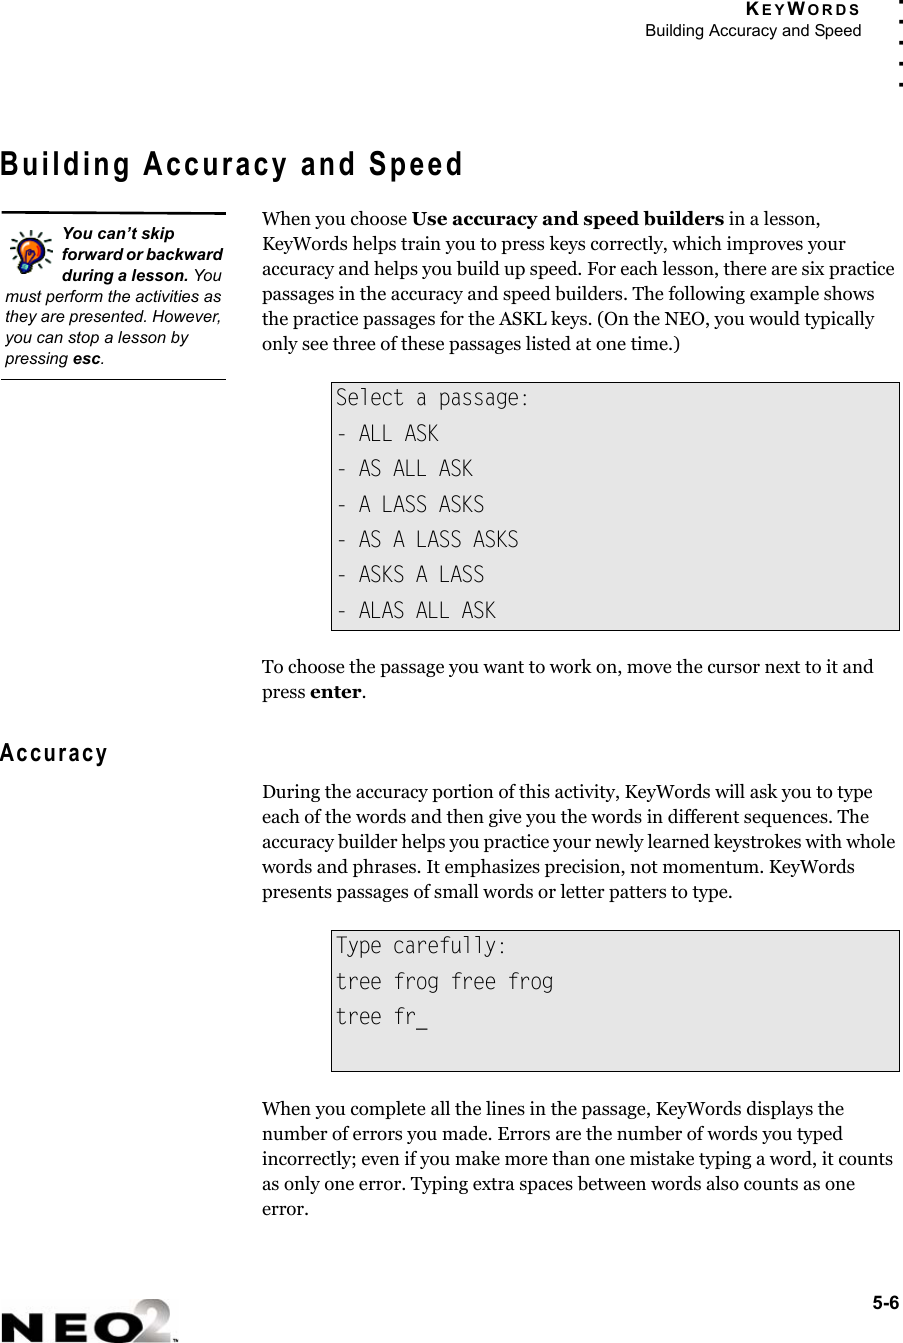 KEYWORDSBuilding Accuracy and Speed5-6. . . . .Building Accuracy and SpeedWhen you choose Use accuracy and speed builders in a lesson, KeyWords helps train you to press keys correctly, which improves your accuracy and helps you build up speed. For each lesson, there are six practice passages in the accuracy and speed builders. The following example shows the practice passages for the ASKL keys. (On the NEO, you would typically only see three of these passages listed at one time.)To choose the passage you want to work on, move the cursor next to it and press enter.AccuracyDuring the accuracy portion of this activity, KeyWords will ask you to type each of the words and then give you the words in different sequences. The accuracy builder helps you practice your newly learned keystrokes with whole words and phrases. It emphasizes precision, not momentum. KeyWords presents passages of small words or letter patters to type.When you complete all the lines in the passage, KeyWords displays the number of errors you made. Errors are the number of words you typed incorrectly; even if you make more than one mistake typing a word, it counts as only one error. Typing extra spaces between words also counts as one error.Select a passage:- ALL ASK- AS ALL ASK- A LASS ASKS- AS A LASS ASKS- ASKS A LASS- ALAS ALL ASKType carefully:tree frog free frogtree fr_You can’t skip forward or backward during a lesson. You must perform the activities as they are presented. However, you can stop a lesson by pressing esc.